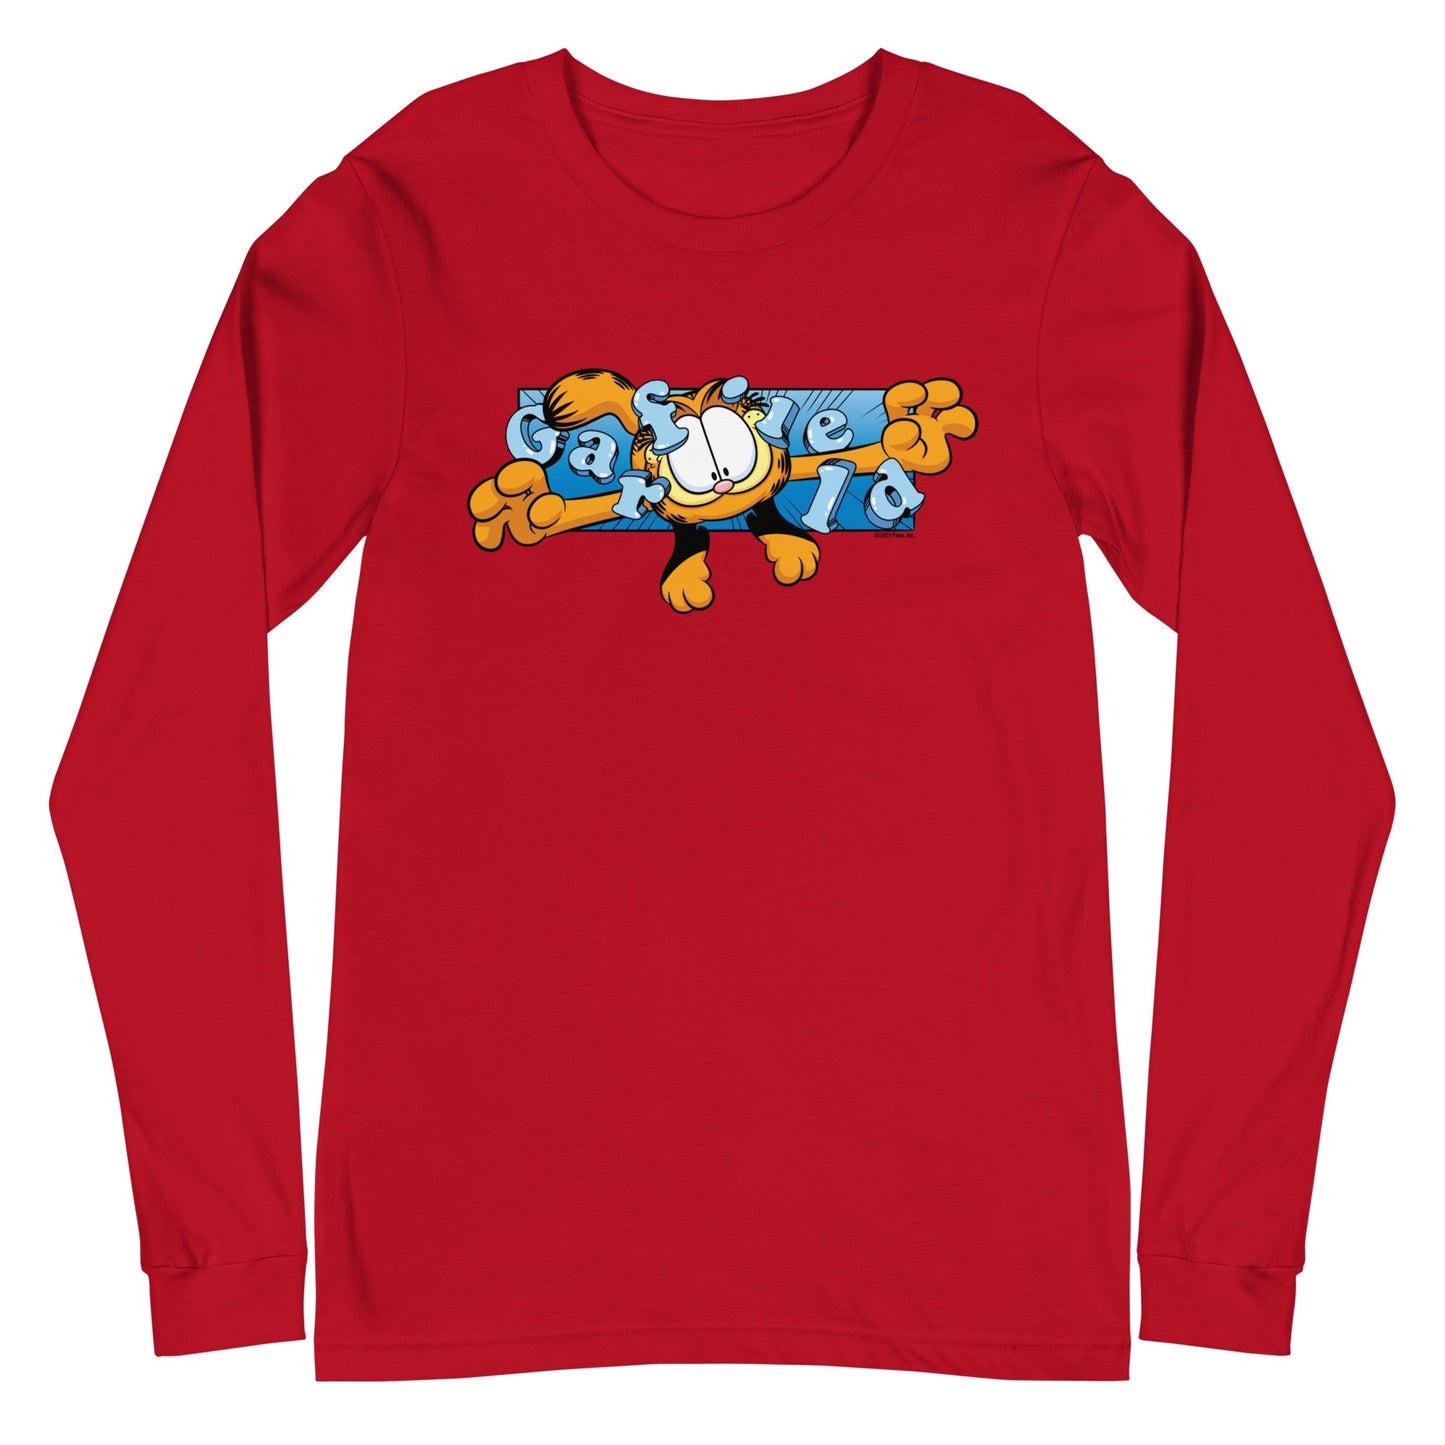 T-shirt à manches longues adultes Garfield Flying Garfield